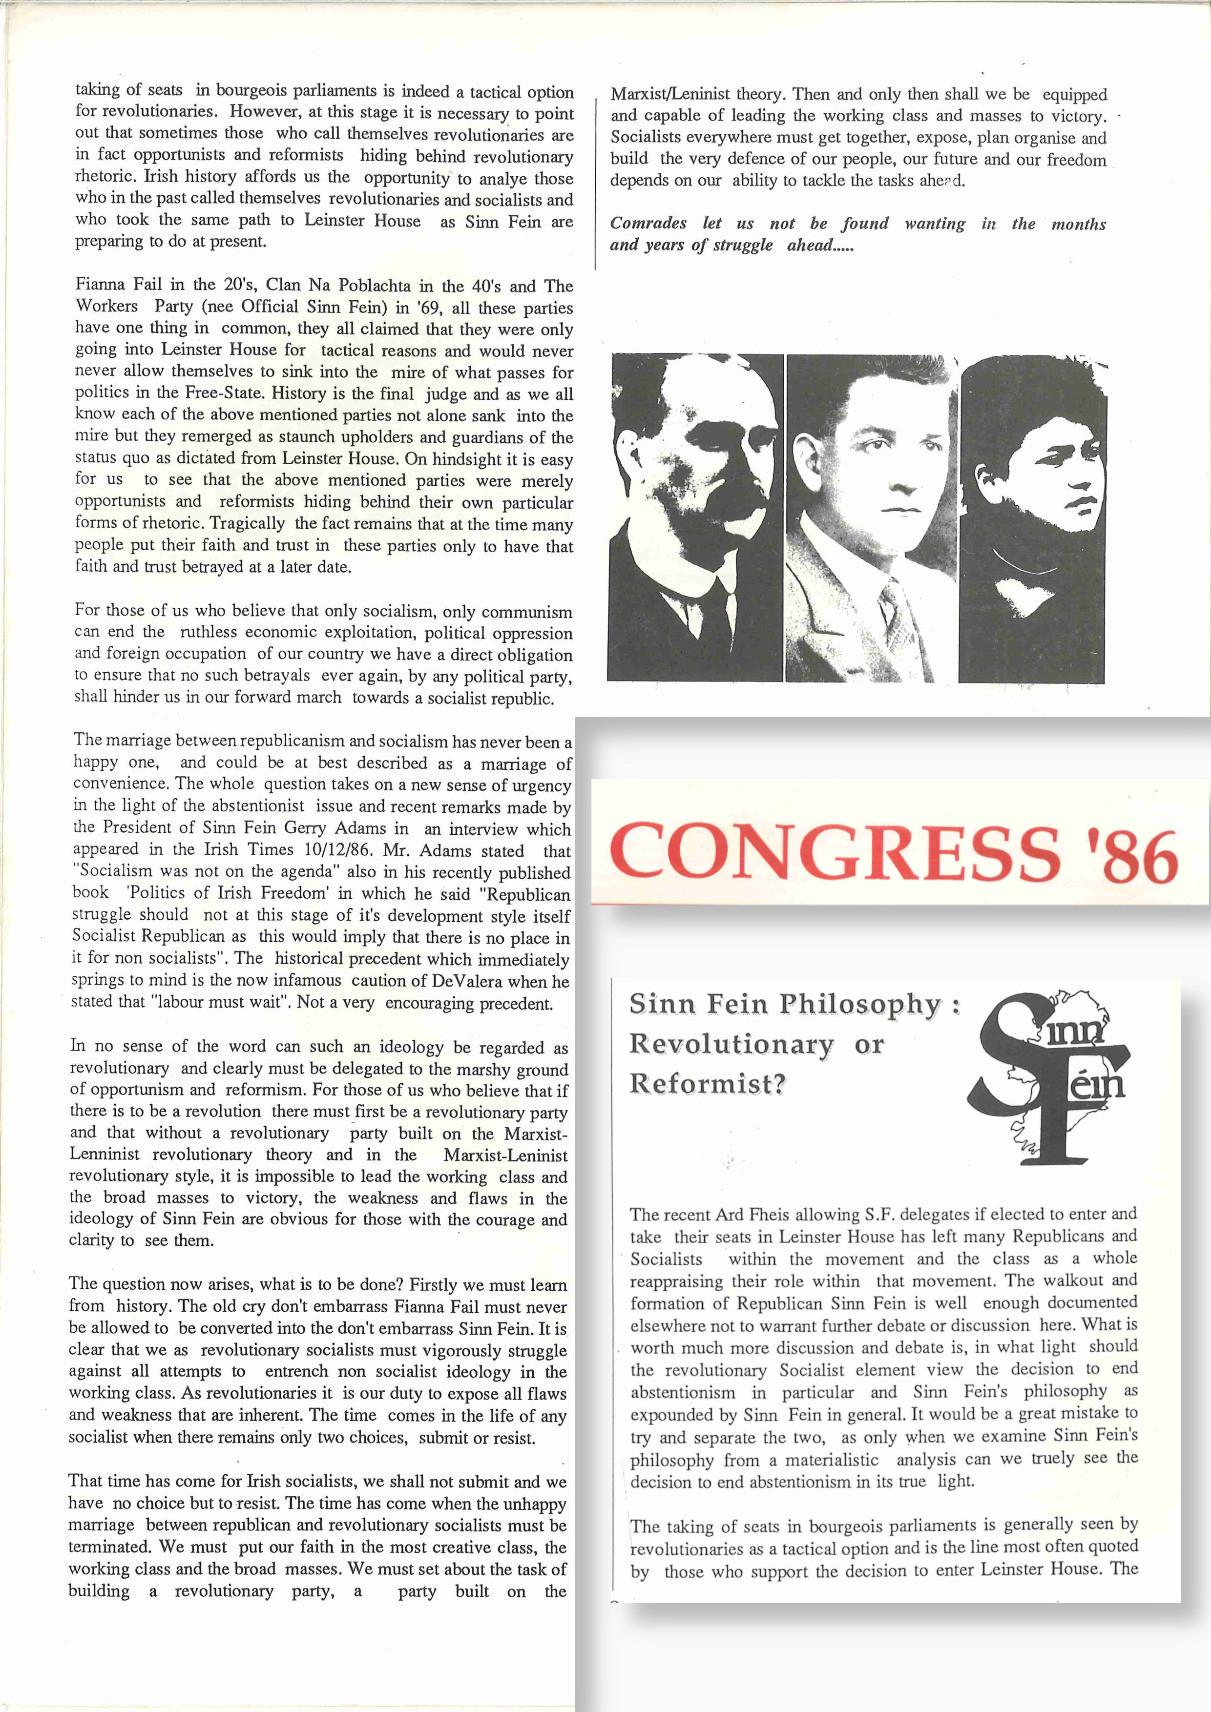 Scanned article reading:

Sinn Féin Philosophy: Revolutionary Or Reformist?

The recent Ard Fheis allowing S.F. delegates if elected to enter and take their seats in Leinster House has left many Republicans and Socialists within the movement and the class as a whole reappraising their role within that movement. The walkout and formation of Republican Sinn Fein is well enough documented elsewhere not to warrant further debate or discussion here. What is worth much more discussion and debate is, in what light should the revolutionary Socialist element view the decision to end abstentionism in particular and Sinn Fein's philosophy as expounded by Sinn Fein in general. It would be a great mistake to try and separate the two, as only when we examine Sinn Fein's philosophy from a materialistic analysis can we truly see the decision to end abstentionism in its true light.

The taking of seats in bourgeois parliaments is generally seen by revolutionaries as a tactical option and is the line most often quoted by those who support the decision to enter Leinster House. The taking of seats in bourgeois parliaments is indeed a tactical option for revolutionaries. However, at this stage it is necessary to point out that sometimes those who call themselves revolutionaries are in fact opportunists and reformists hiding behind revolutionary rhetoric. Irish history affords us the opportunity to analyse those who in the past called themselves revolutionaries and socialists and who took the same path to Leinster House as Sinn Fein are preparing to do at present.

Fianna Fail in the 20's, Clan Na Poblachta in the 40's and The Workers Party (nee Official Sinn Fein) in '69, all these parties have one thing in common, they all claimed that they were only going into Leinster House for tactical reasons and would never never allow themselves to sink into the mire of what passes for politics in the Free-State. History is the final judge and as we all know each of the above mentioned parties not alone sank into the mire but they remerged as staunch upholders and guardians of the status quo as dictated from Leinster House. On hindsight it is easy for us to see that the above mentioned parties were merely opportunists and reformists hiding behind their own particular forms of rhetoric. Tragically the fact remains that at the time many people put their faith and trust in these parties only to have that faith and trust betrayed at a later date.

For those of us who believe that only socialism, only communism can end the ruthless economic exploitation, political oppression and foreign occupation of our country we have a direct obligation to ensure that no such betrayals ever again, by any political party, shall hinder us in our forward march towards a socialist republic.

The marriage between republicanism and socialism has never been a happy one, and could be at best described as a marriage of convenience. The whole question takes on a new sense of urgency in the light of the abstentionist issue and recent remarks made by the President of Sinn Fein Gerry Adams in an interview which appeared in the Irish Times 10/12/86. Mr. Adams stated that “Socialism was not on the agenda” also in his recently published book ‘Politics of Irish Freedom' in which he said "Republican struggle should not at this stage of it's development style itself Socialist Republican as this would imply that there is no place in it for non socialists”. The historical precedent which immediately springs to mind is the now infamous caution of DeValera when he stated that "labour must wait", Not a very encouraging precedent.

In no sense of the word can such an ideology be regarded as revolutionary and clearly must be delegated to the marshy ground of opportunism and reformism. For those of us who believe that if there is to be a revolution there must first be a revolutionary party and that without a revolutionary party built on the Marxist-Leninist revolutionary theory and in the Marxist-Leninist revolutionary style, it is impossible to lead the working class and the broad masses to victory, the weakness and flaws in the ideology of Sinn Fein are obvious for those with the courage and clarity to see them.

The question now arises, what is to be done? Firstly we learn from history. The old cry don't embarrass Fianna Fail must never be allowed to be converted into the don't embarrass Sinn Fein. It is clear that we as revolutionary socialists must vigorously struggle against all attempts to entrench non socialist ideology in the working class. As revolutionaries it is our duty to expose all flaws and weakness that are inherent. The time comes in the life of any socialist when there remains only two choices, submit or resist.

That time has come for Irish socialists, we shall not submit and we have no choice but to resist. The time has come when the unhappy marriage between republican and revolutionary socialists must be terminated. We must put our faith in the most creative class, the working class and the broad masses. We must set about the task of building a revolutionary party, a party built on the


Marxist/Leninist theory. Then and only then shall we be equipped and capable of leading the working class and masses to victory.
Socialists everywhere must get together, expose, plan organise and build the very defence of our people, our future and our freedom depends on our ability o tackle the tasks ahead.

Comrades let us not be found wanting in the months and years of struggle ahead…